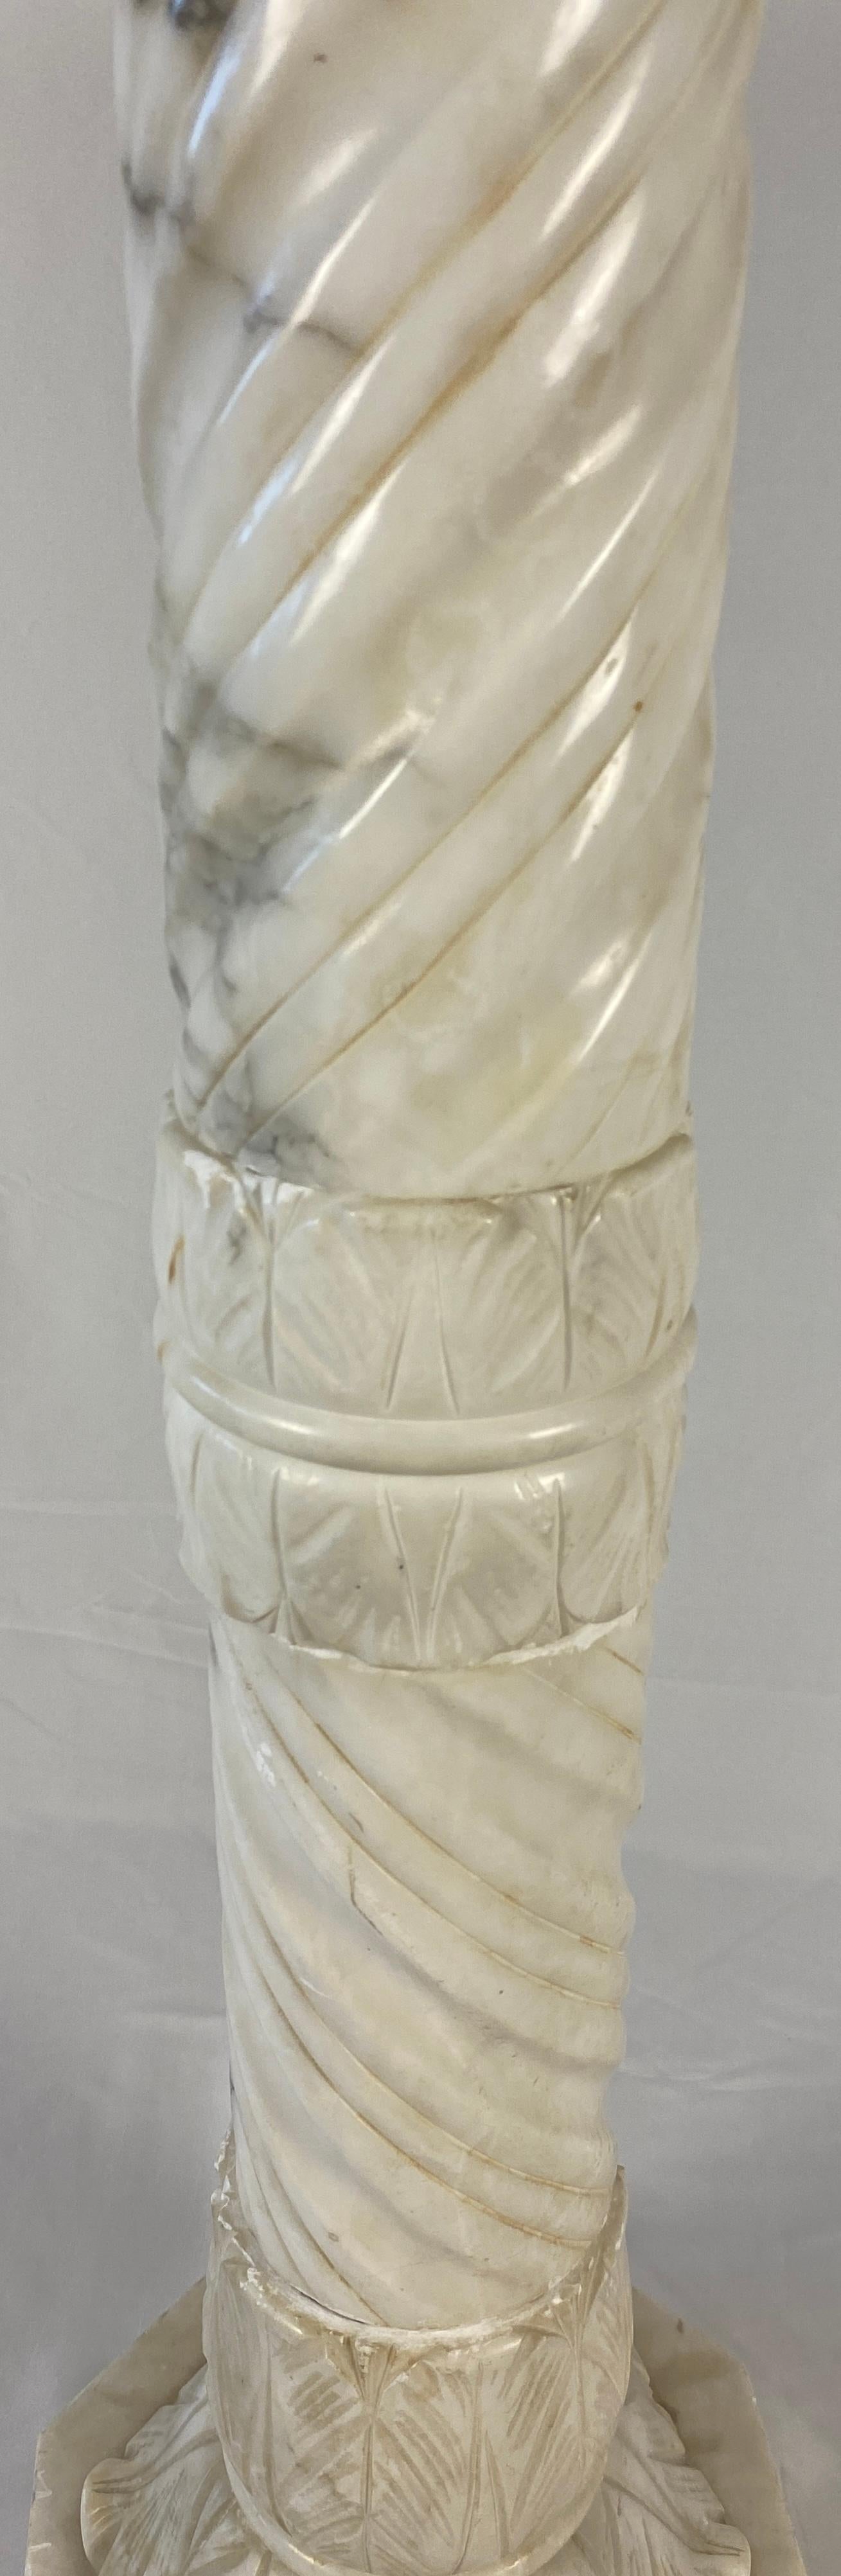 19th Century Italian Hand-Carved Carrara Marble Pedestal or Decorative Stand For Sale 2